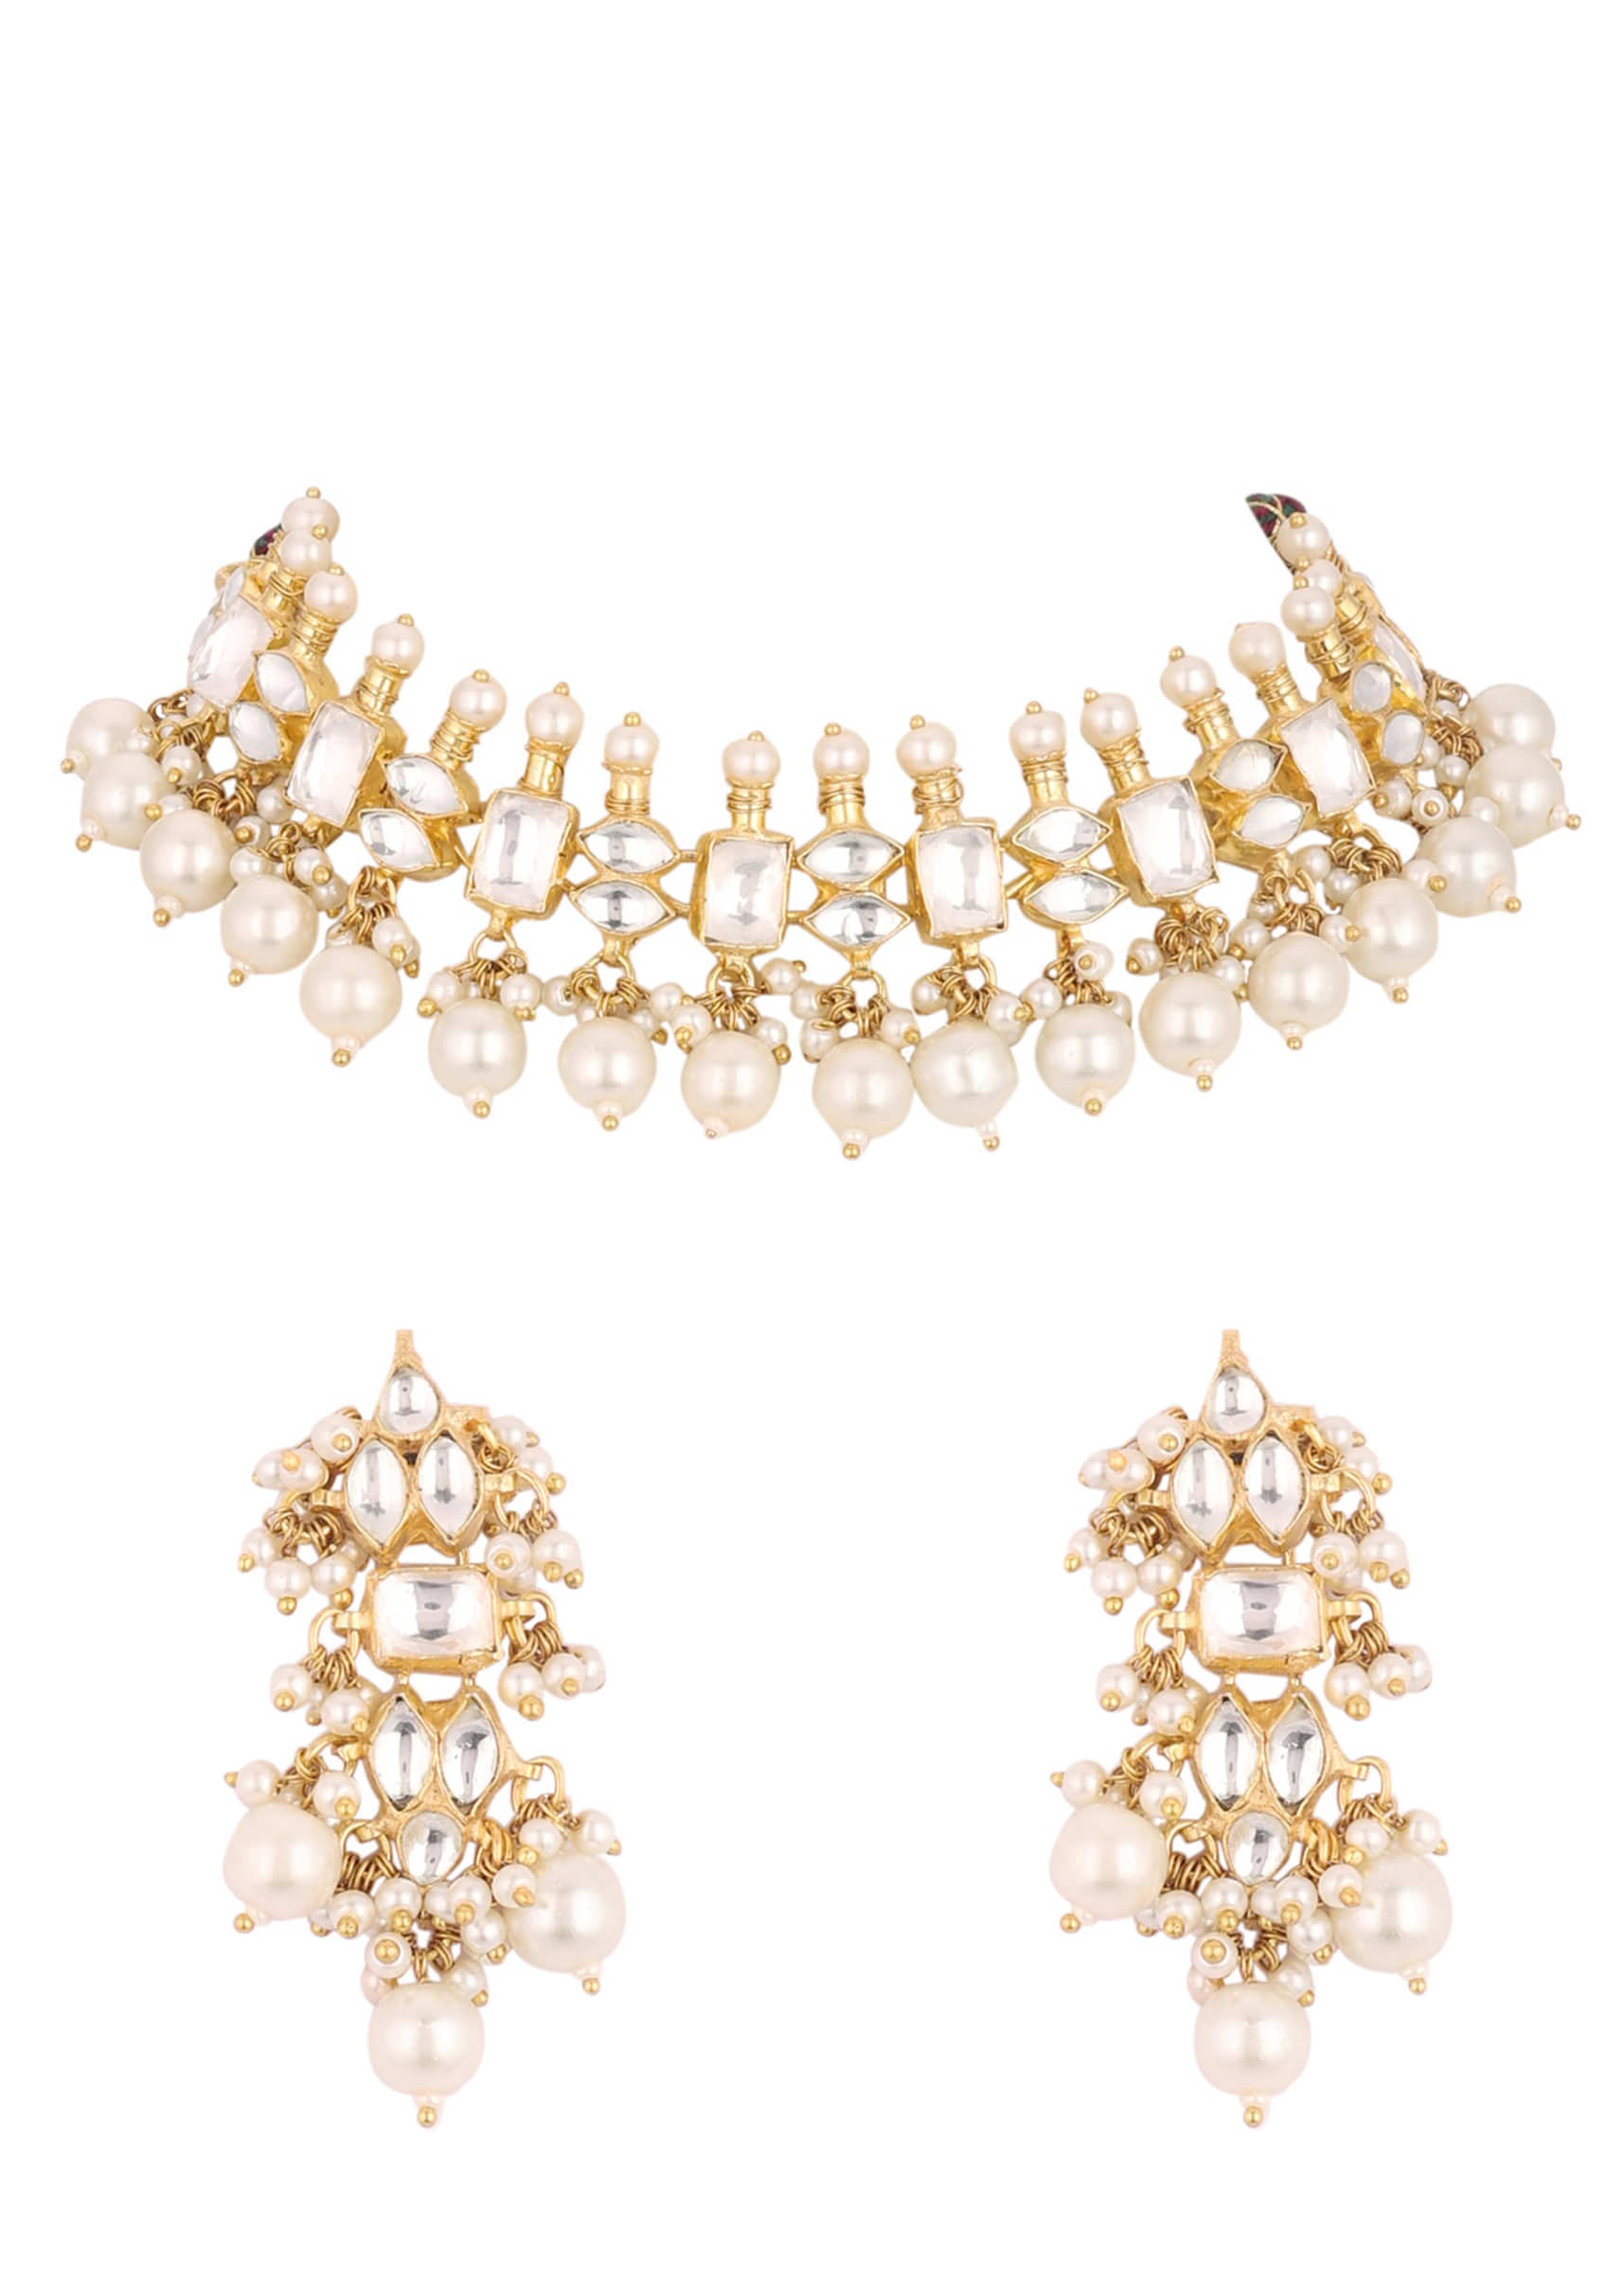 Gold Finish Kundan Polki White Necklace Set With Beads, Stones, And Pearls